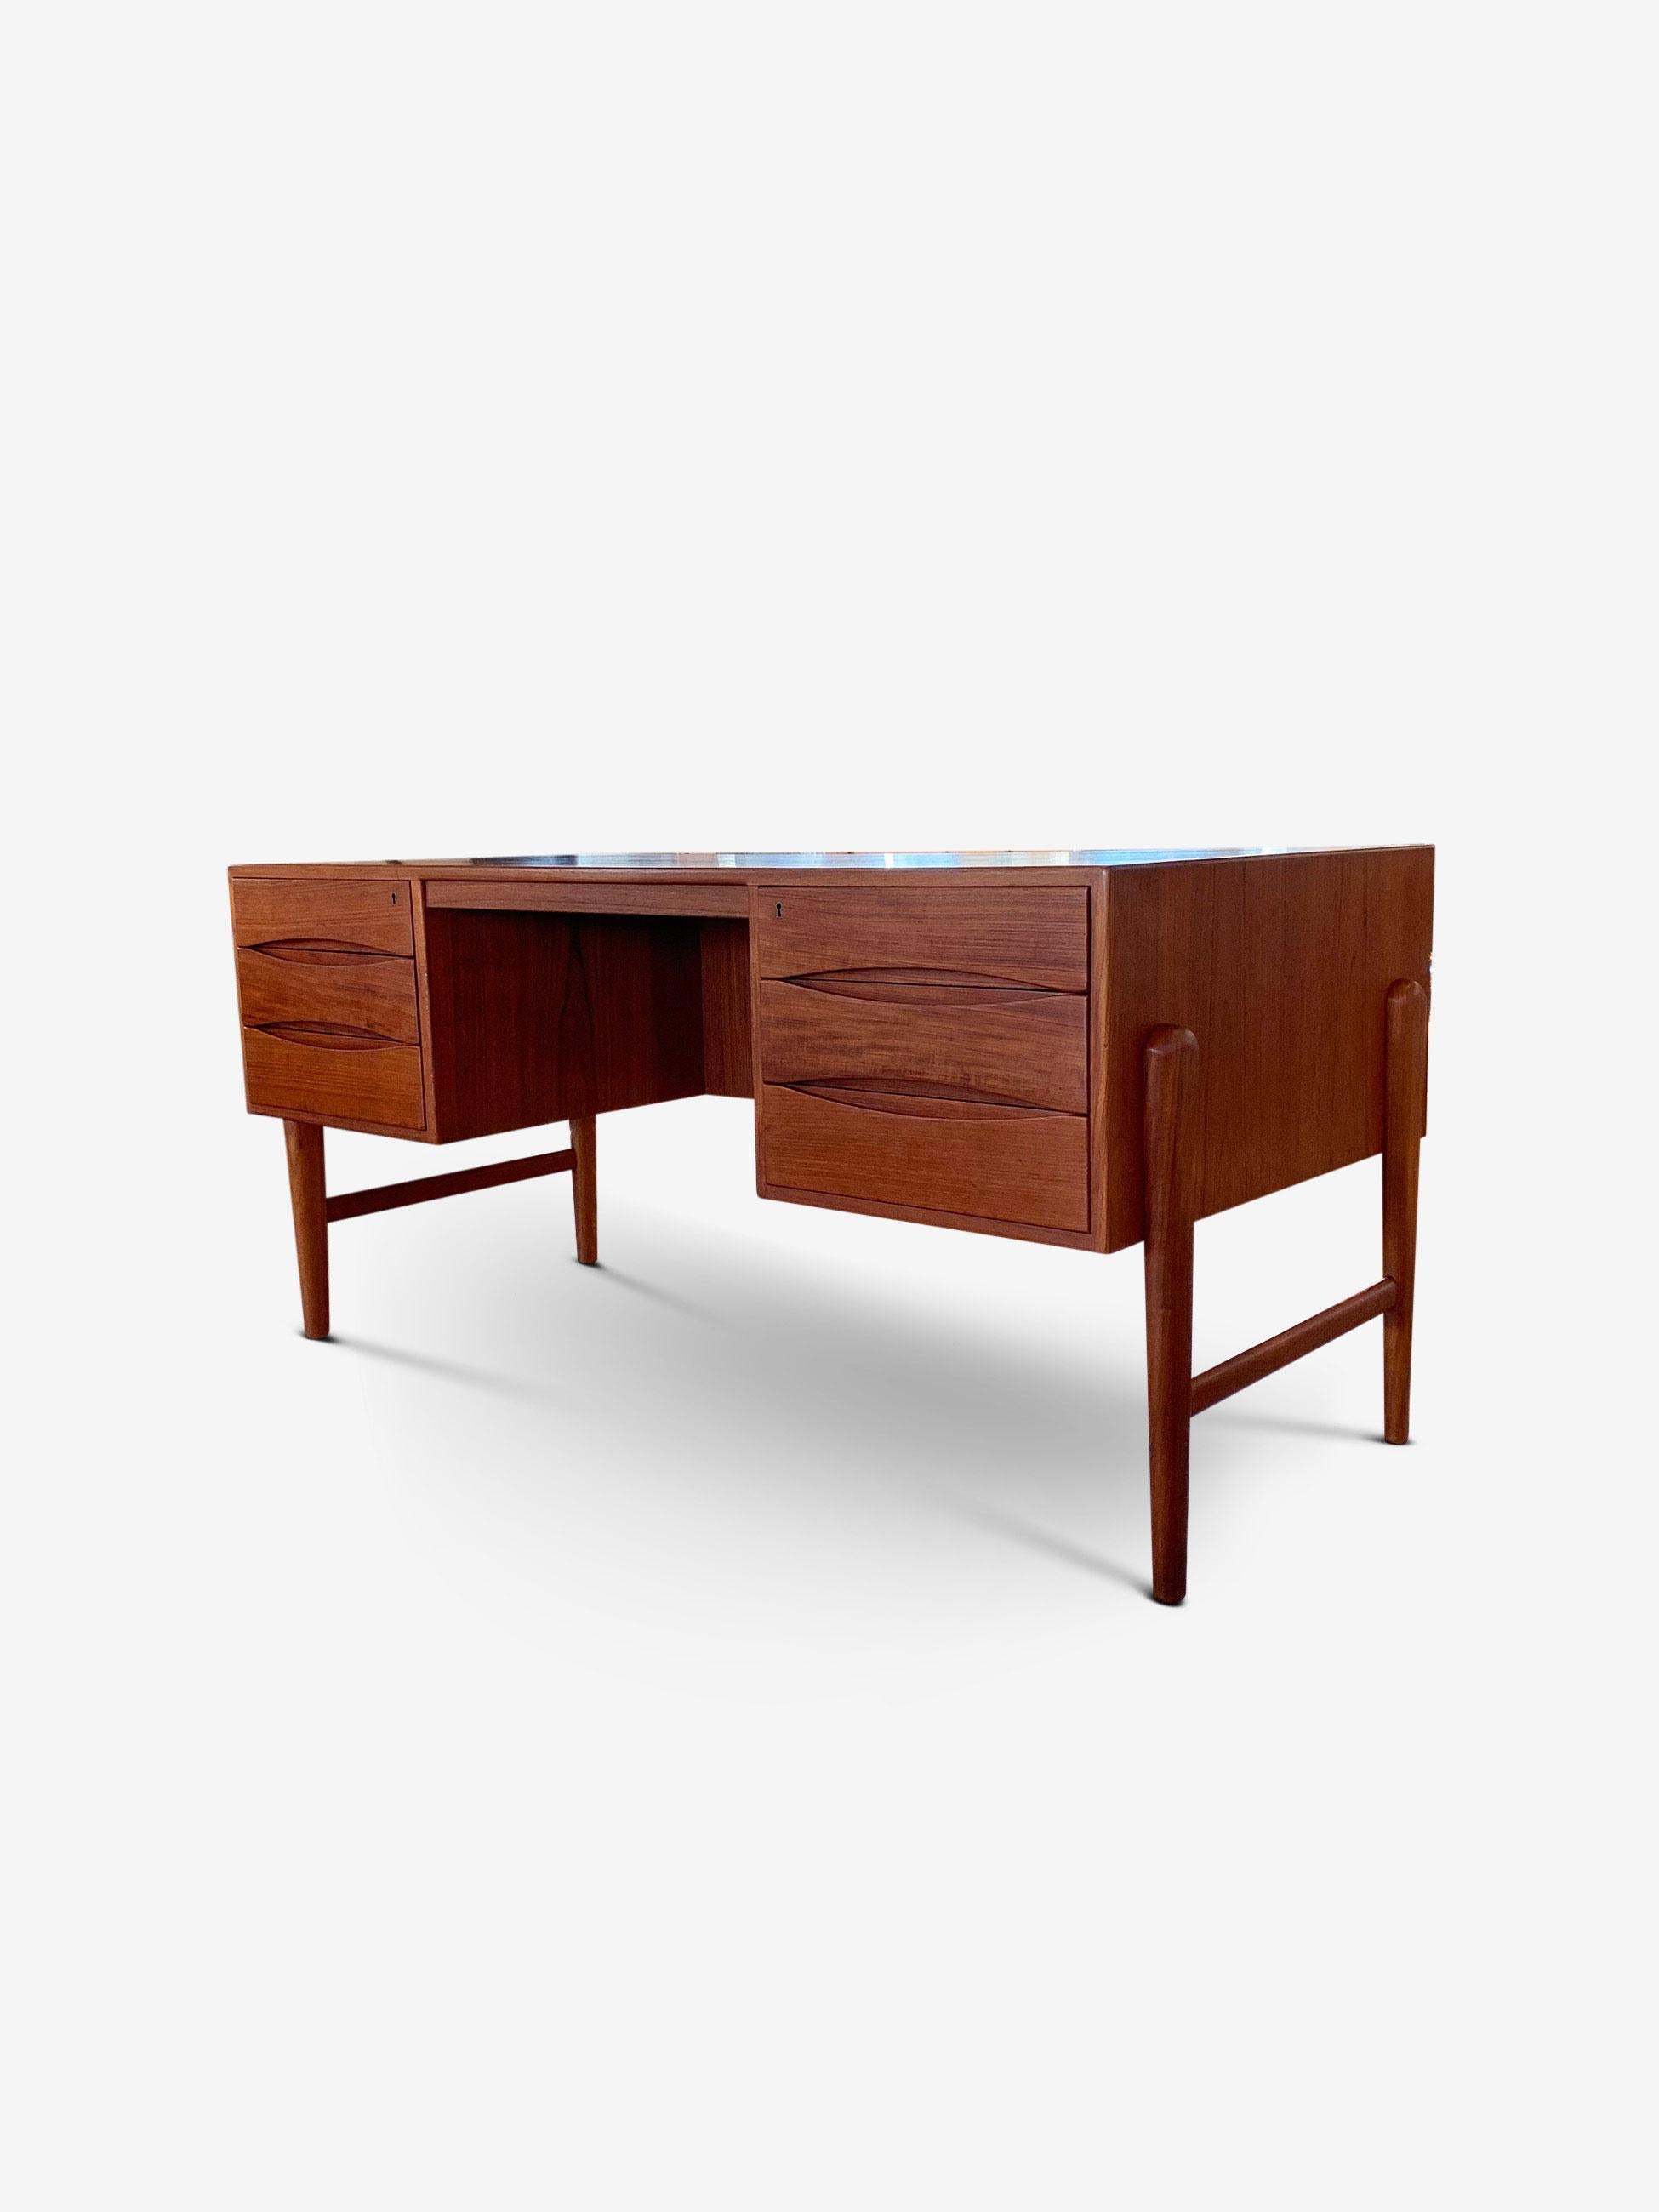 This beautiful double sided teak desk is composed of three drawers on each side with two original locks and keys. The bookcase niche in front allows for easy placement in any room. The eye-shaped recessed pull drawers and tapered legs give this